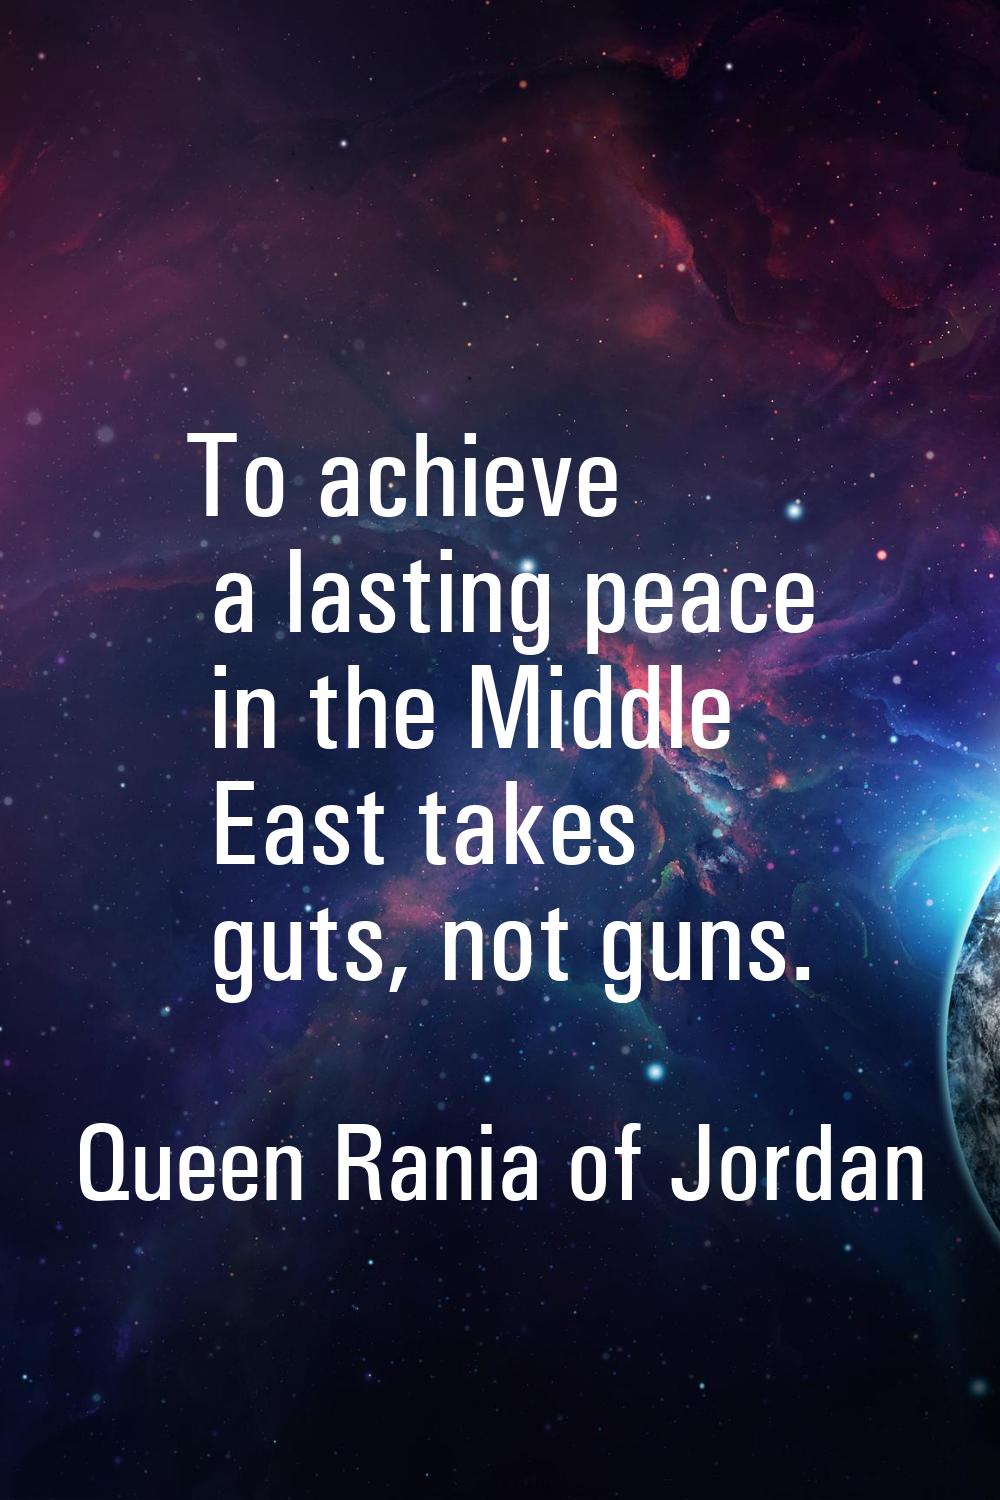 To achieve a lasting peace in the Middle East takes guts, not guns.